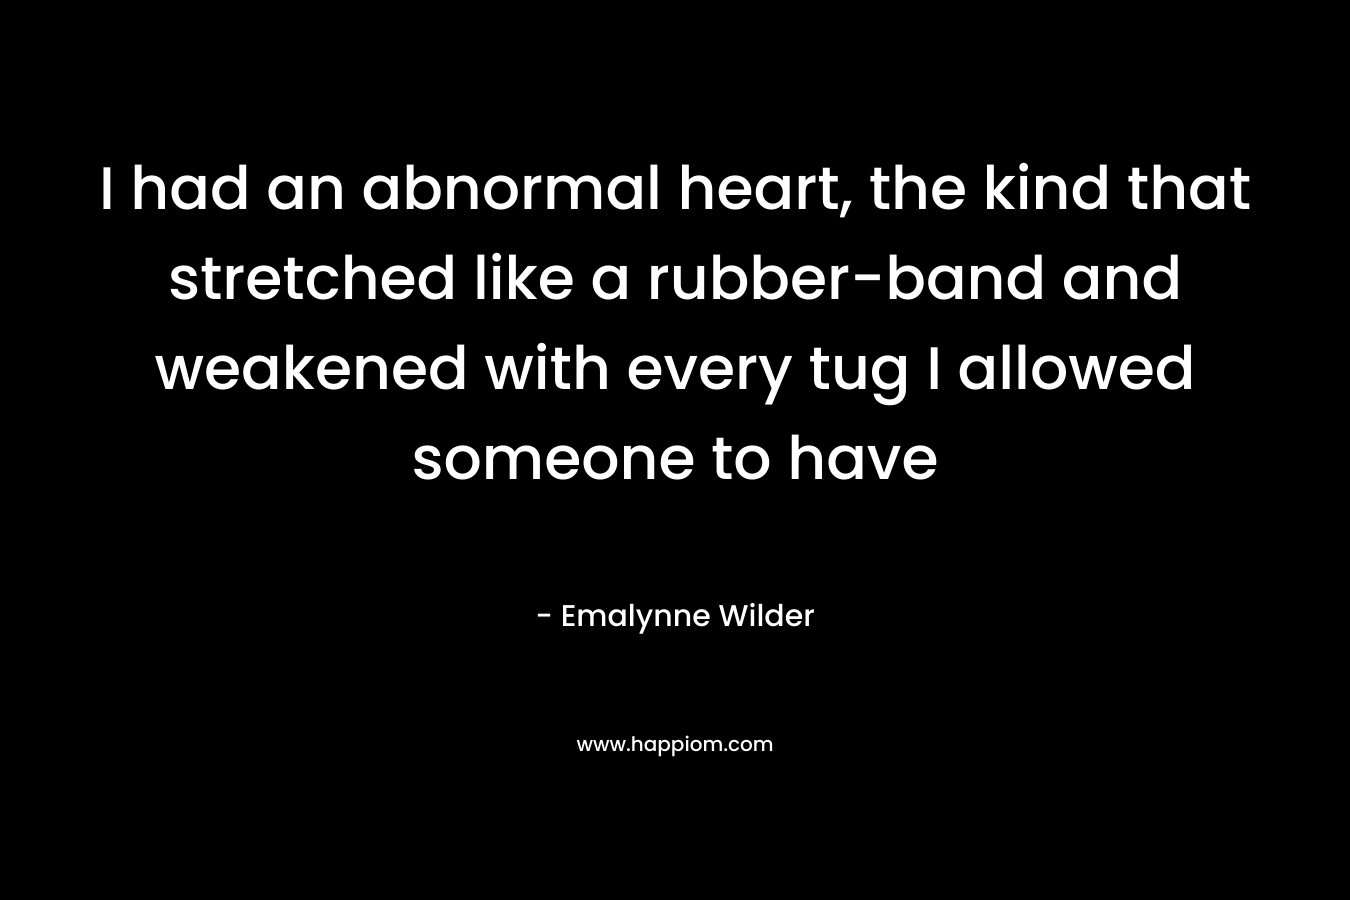 I had an abnormal heart, the kind that stretched like a rubber-band and weakened with every tug I allowed someone to have – Emalynne Wilder